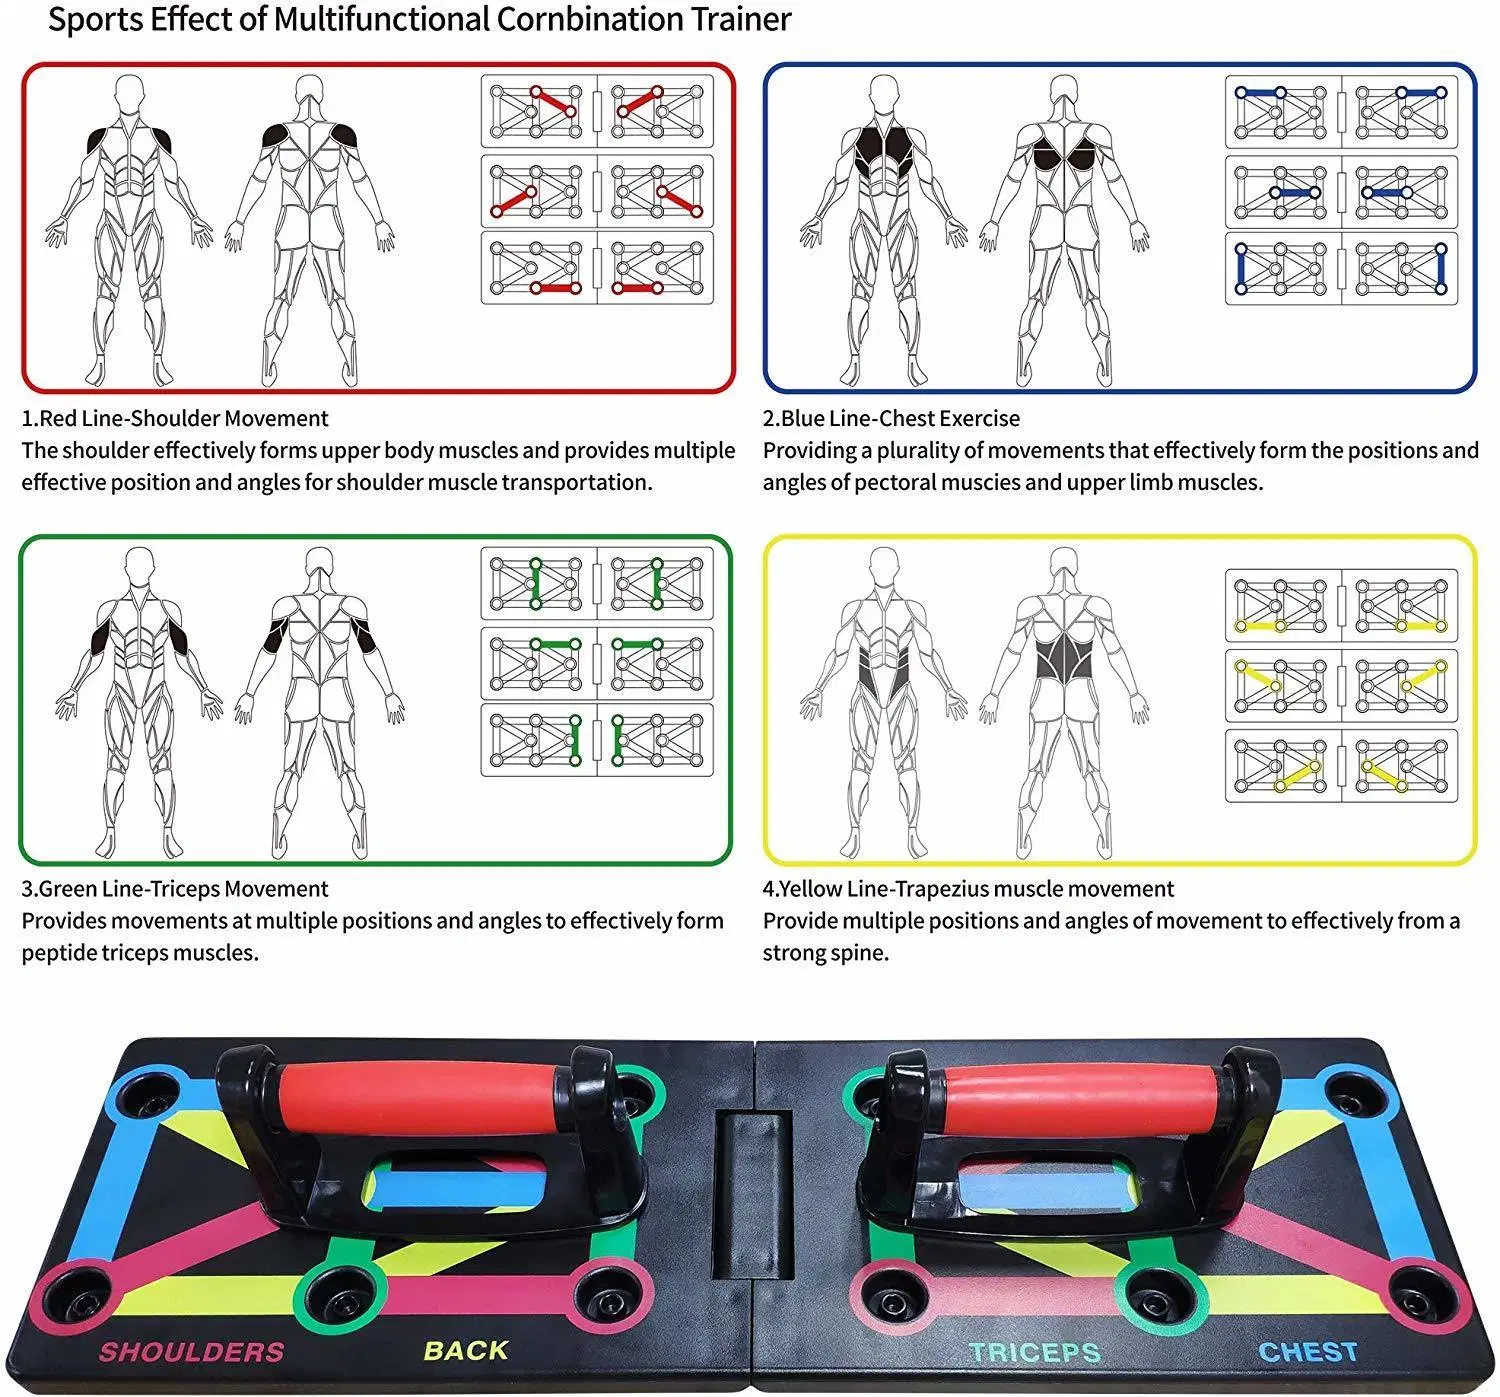 Portable Bracket Board System 12-in-1 Push up Board System, Body Building Exercise Tools Workout Push-up Stands for Men Women Home Fitness Training Bl12985